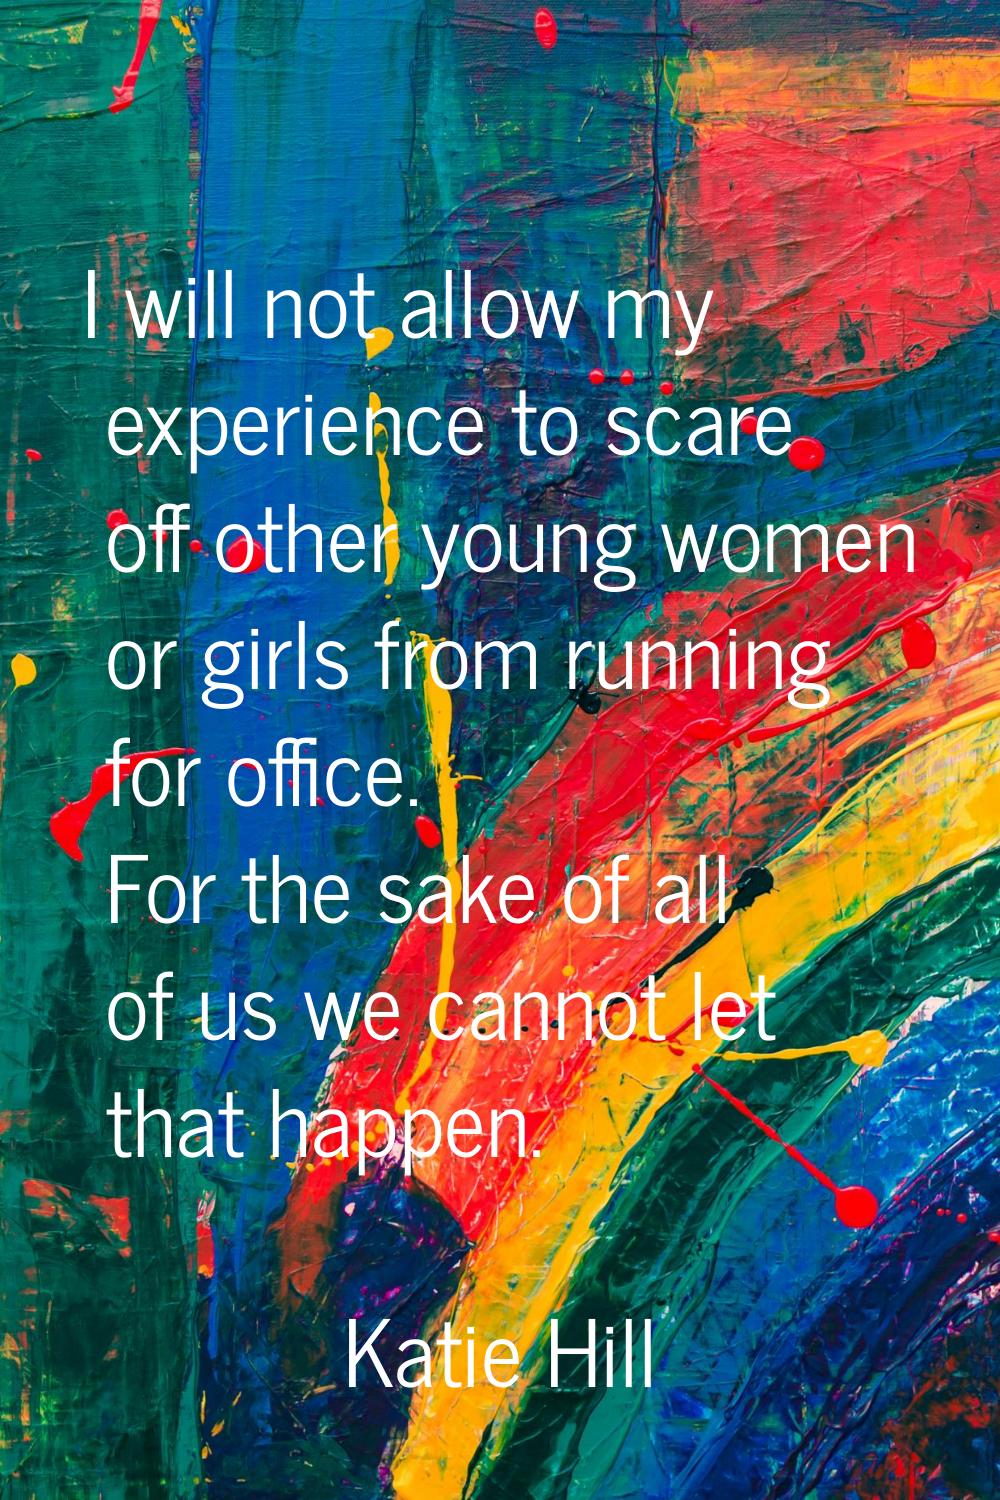 I will not allow my experience to scare off other young women or girls from running for office. For